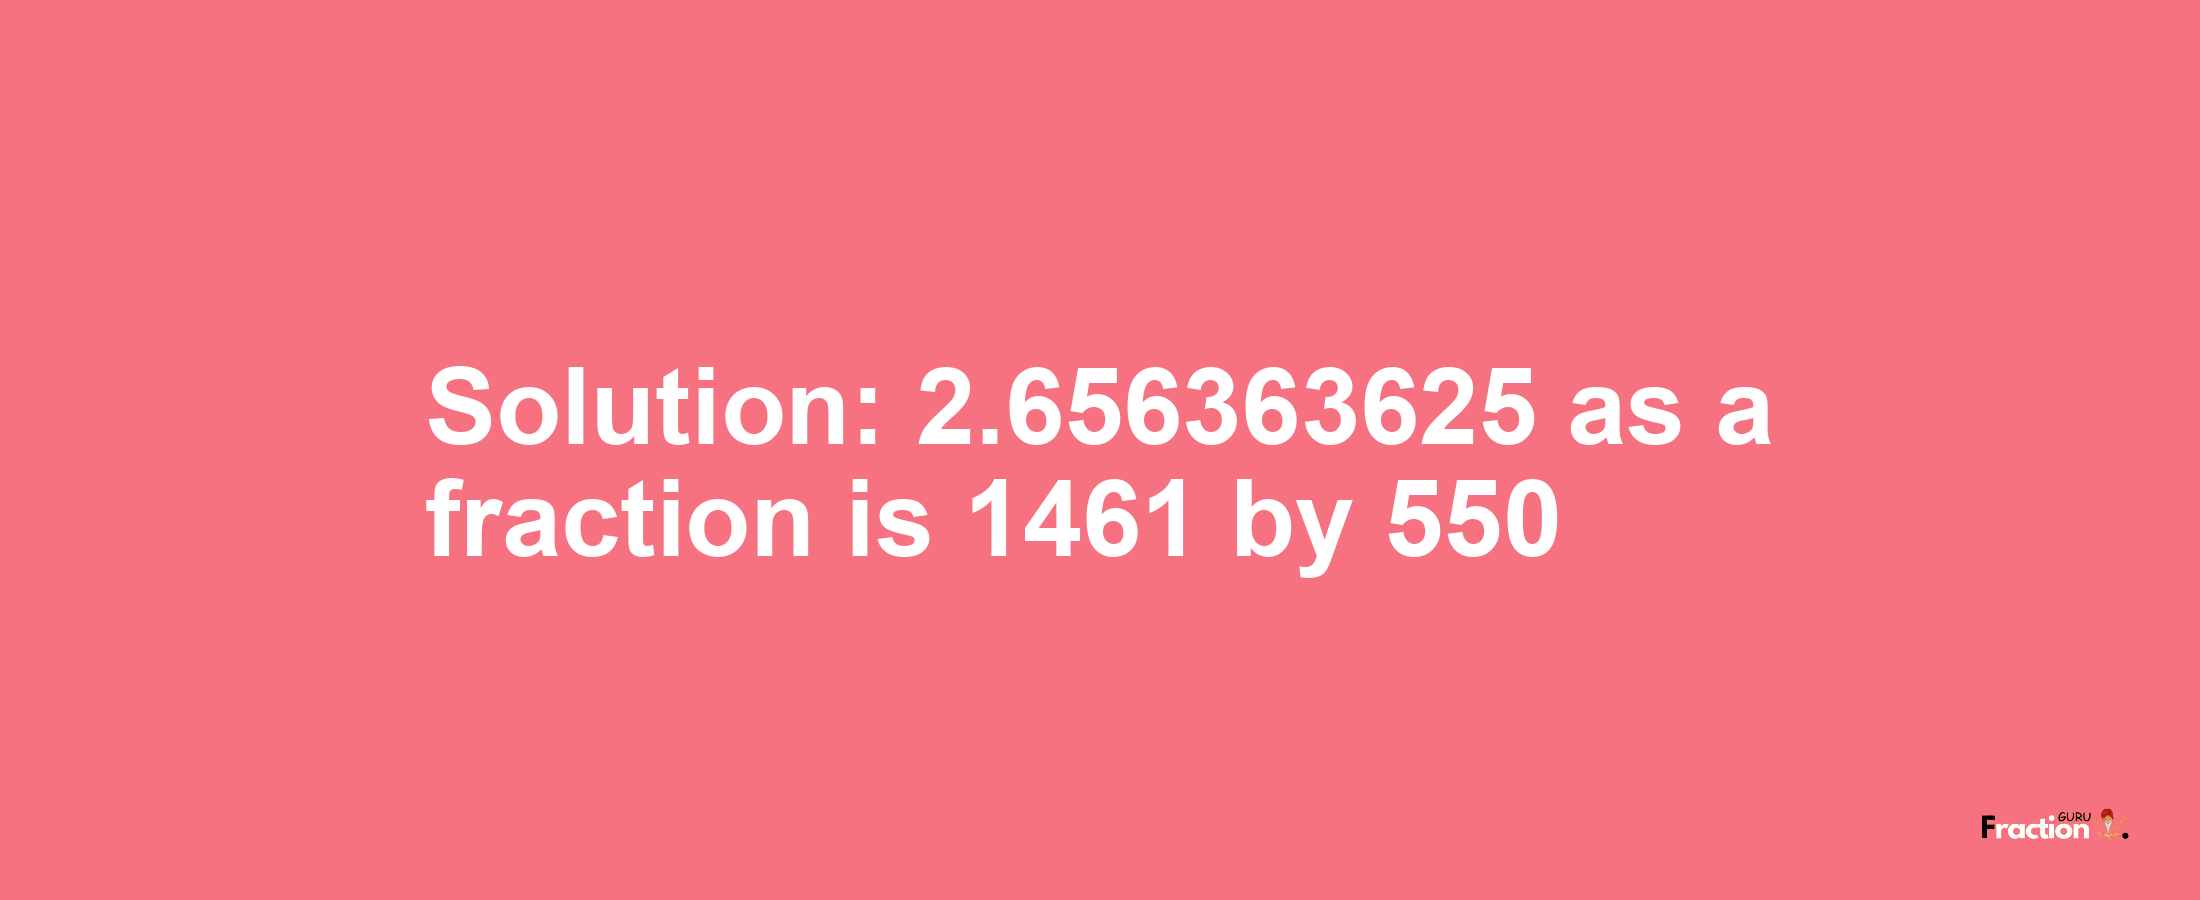 Solution:2.656363625 as a fraction is 1461/550